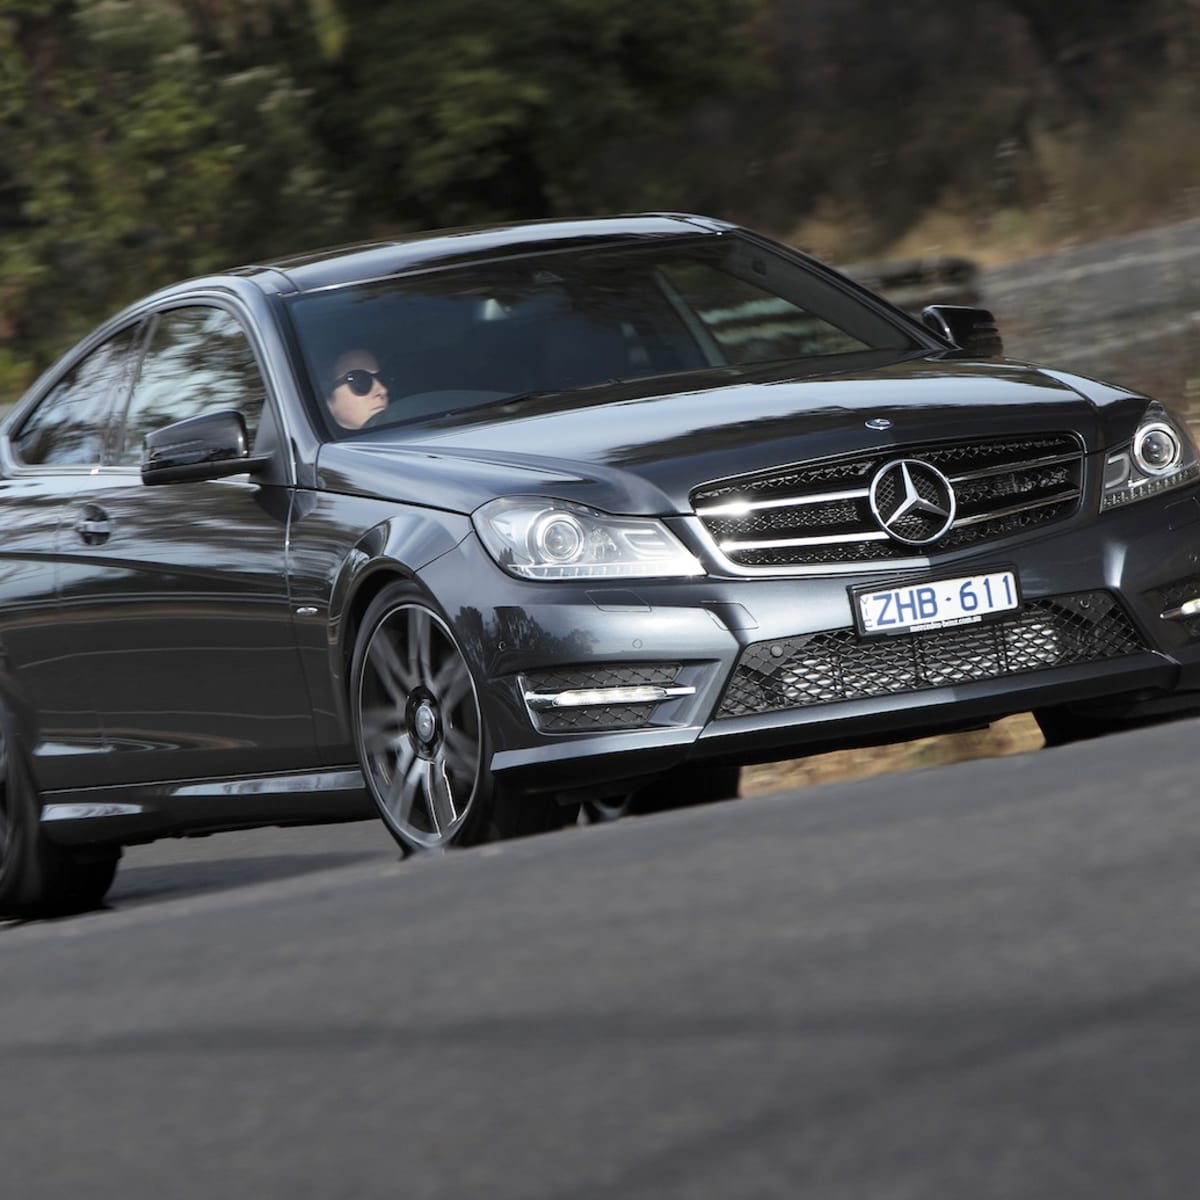 Mercedes Benz C250 Coupe Sport Review Caradvice